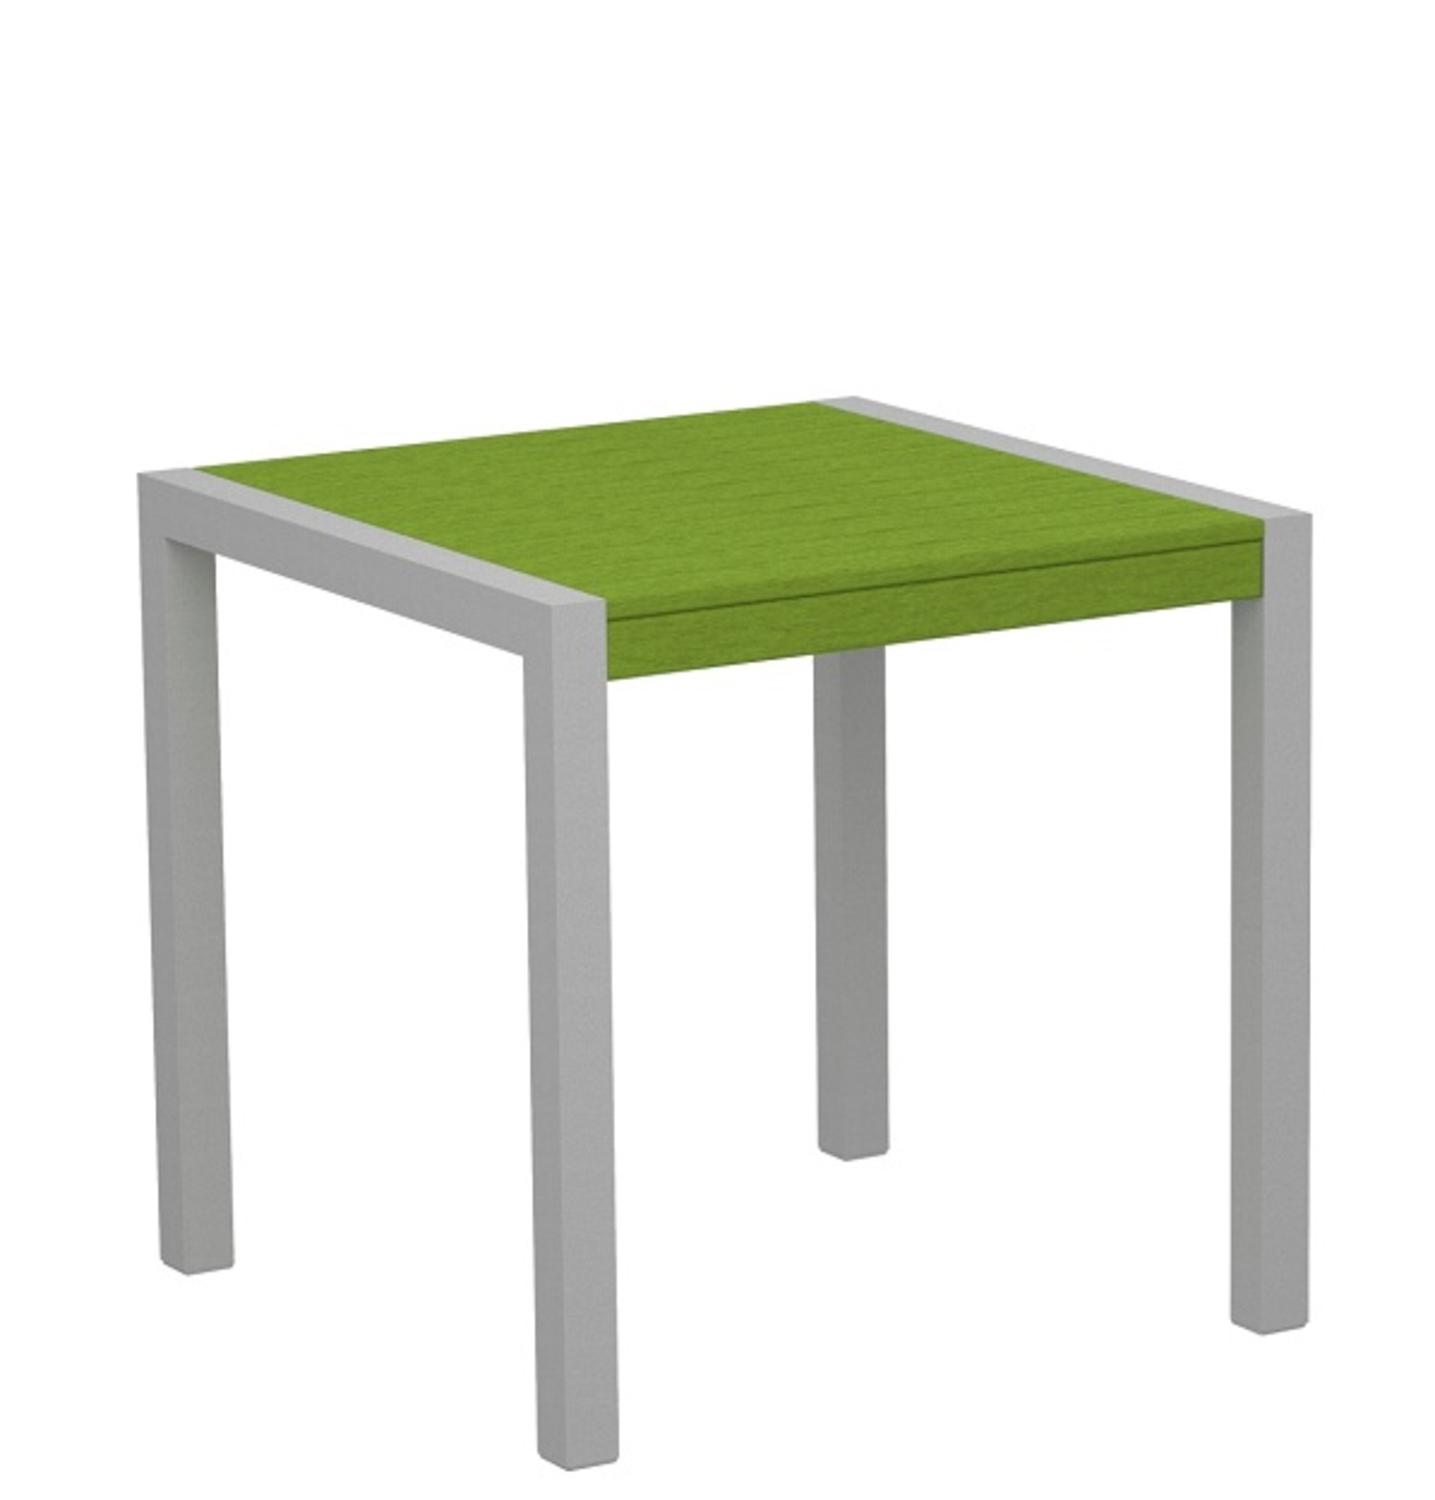 Eco-Friendly Furnishings 30" Recycled Earth-Friendly Outdoor Bistro Table - Lime Green with Silver Frame